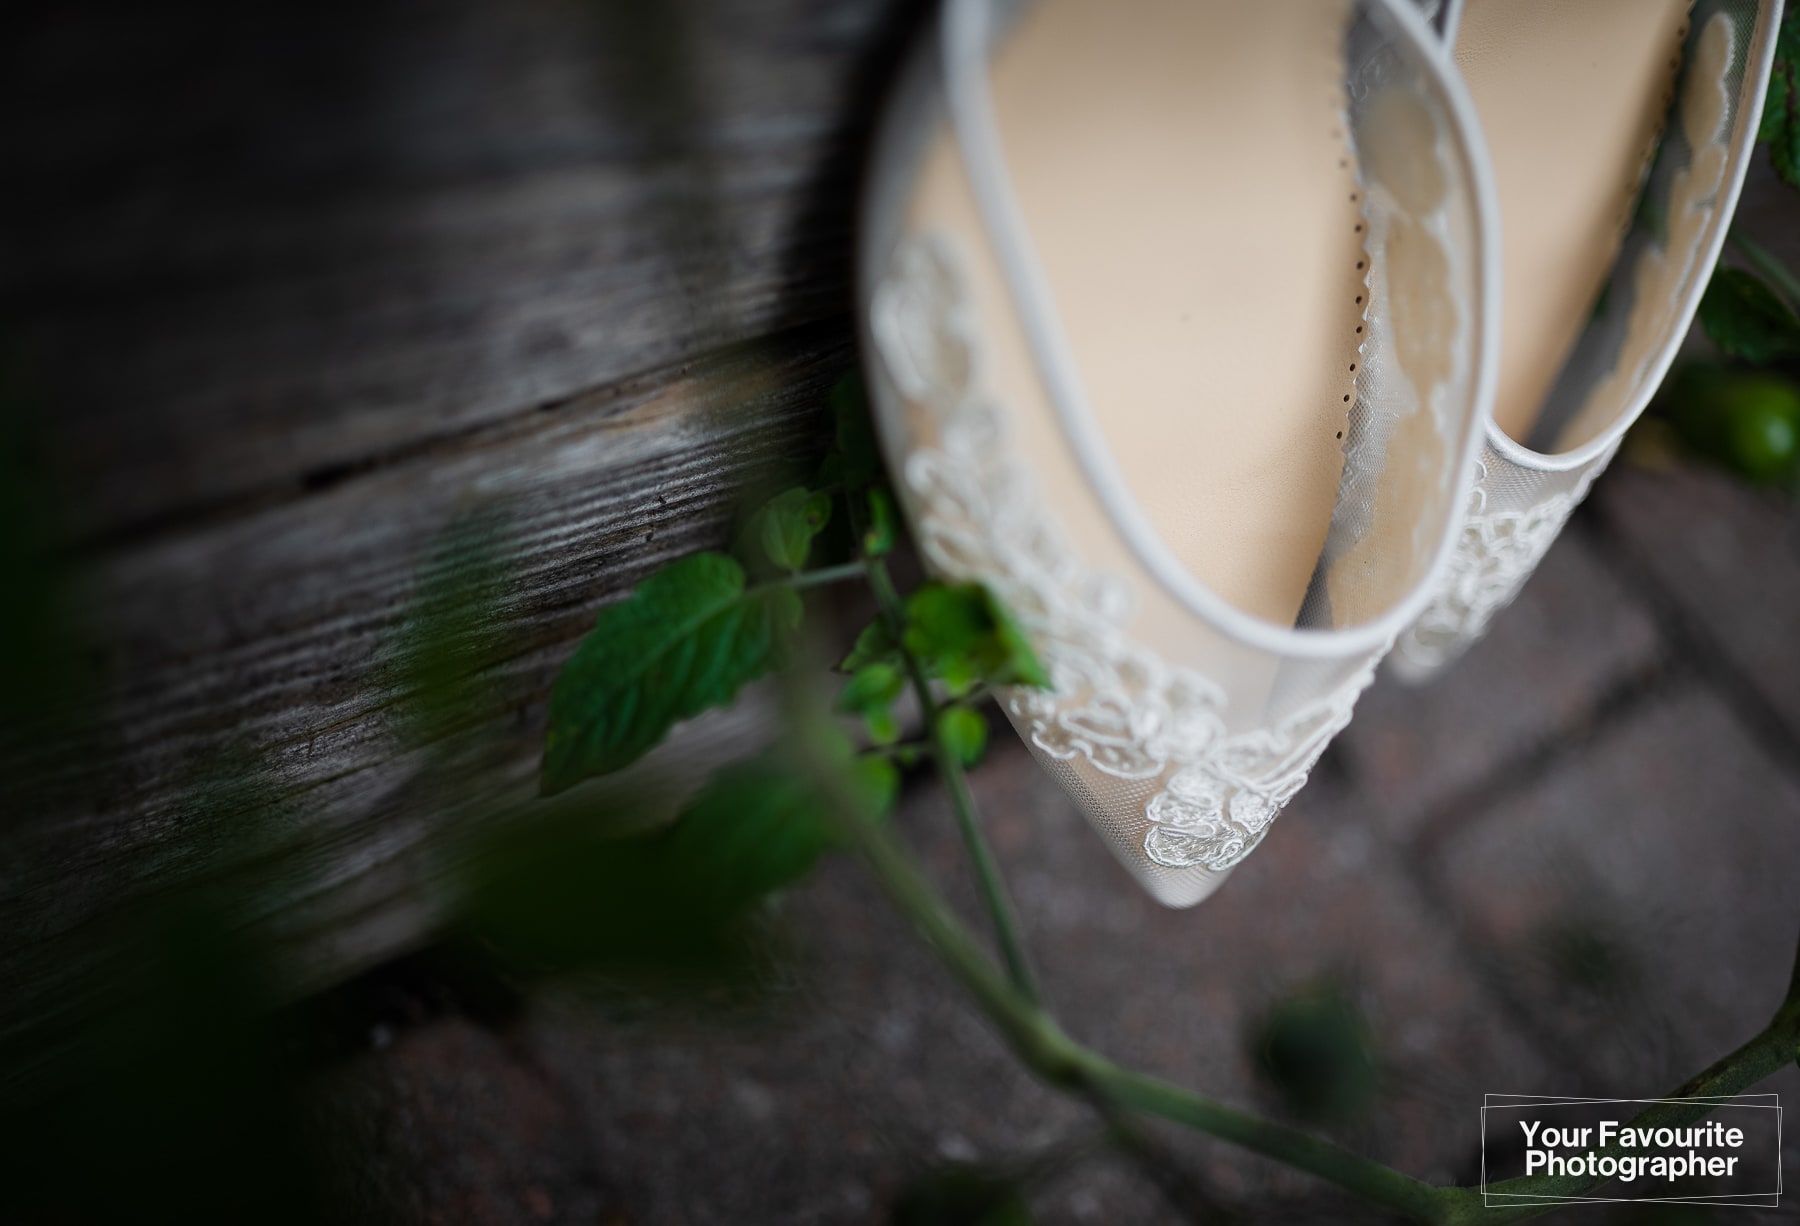 Lace wedding shoes in the garden